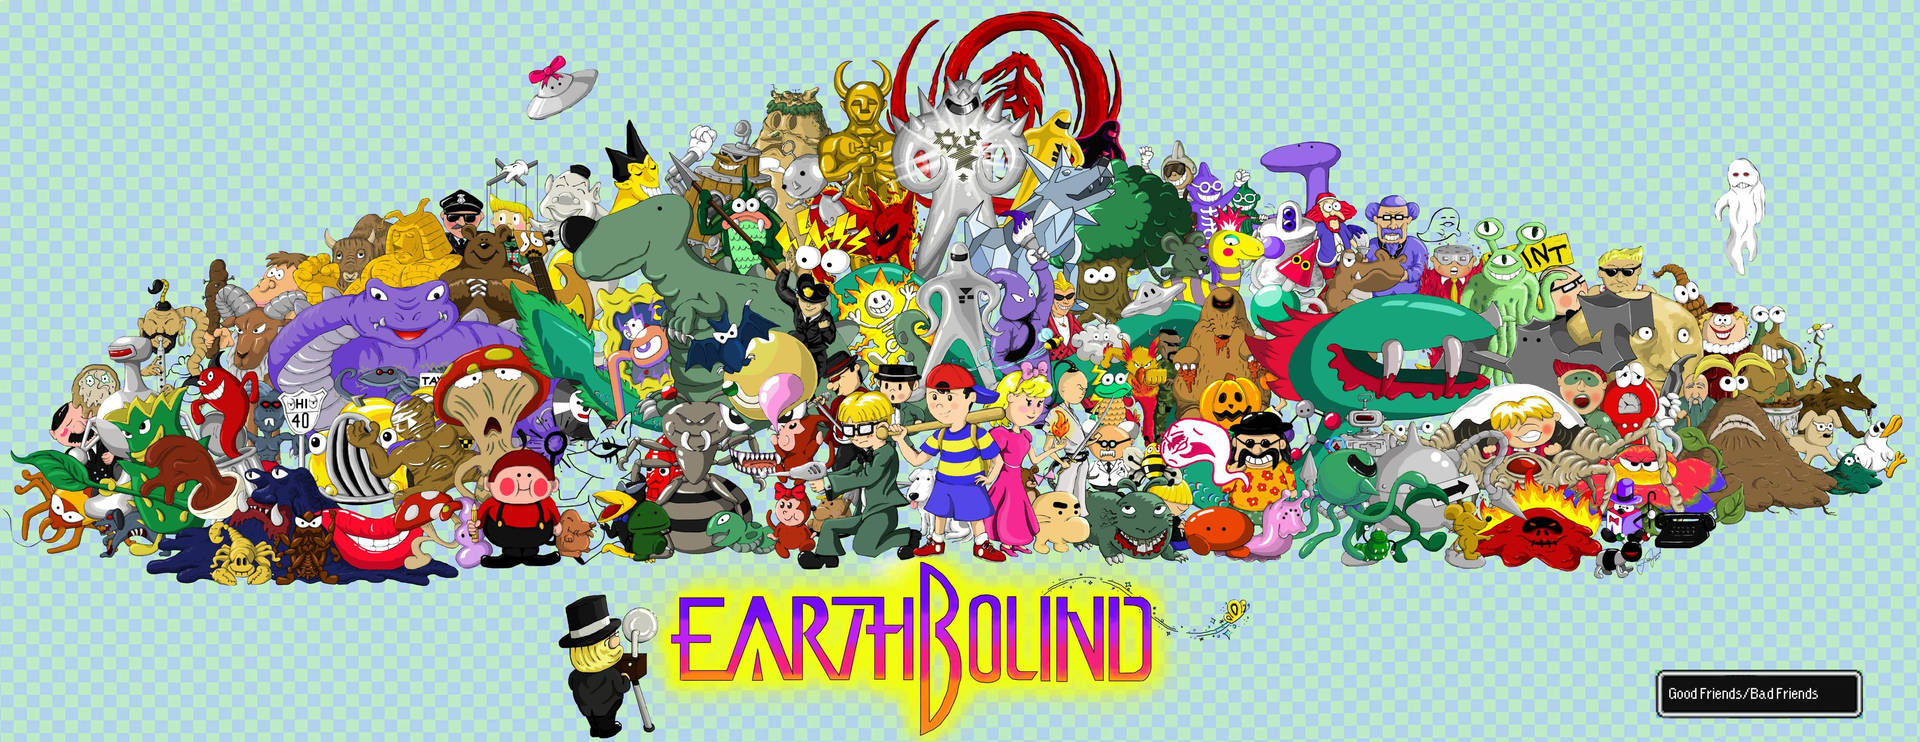 The Team of Earthbound | Description: Heroes of Earthbound, Jeff, Paula, Poo and Ness journey through various lands, uniting forces to stand against Giygas | Related Keywords: Earthbound, Jeff, Paula, Poo, Ness, Giygas, Adventure, Video Game Wallpaper